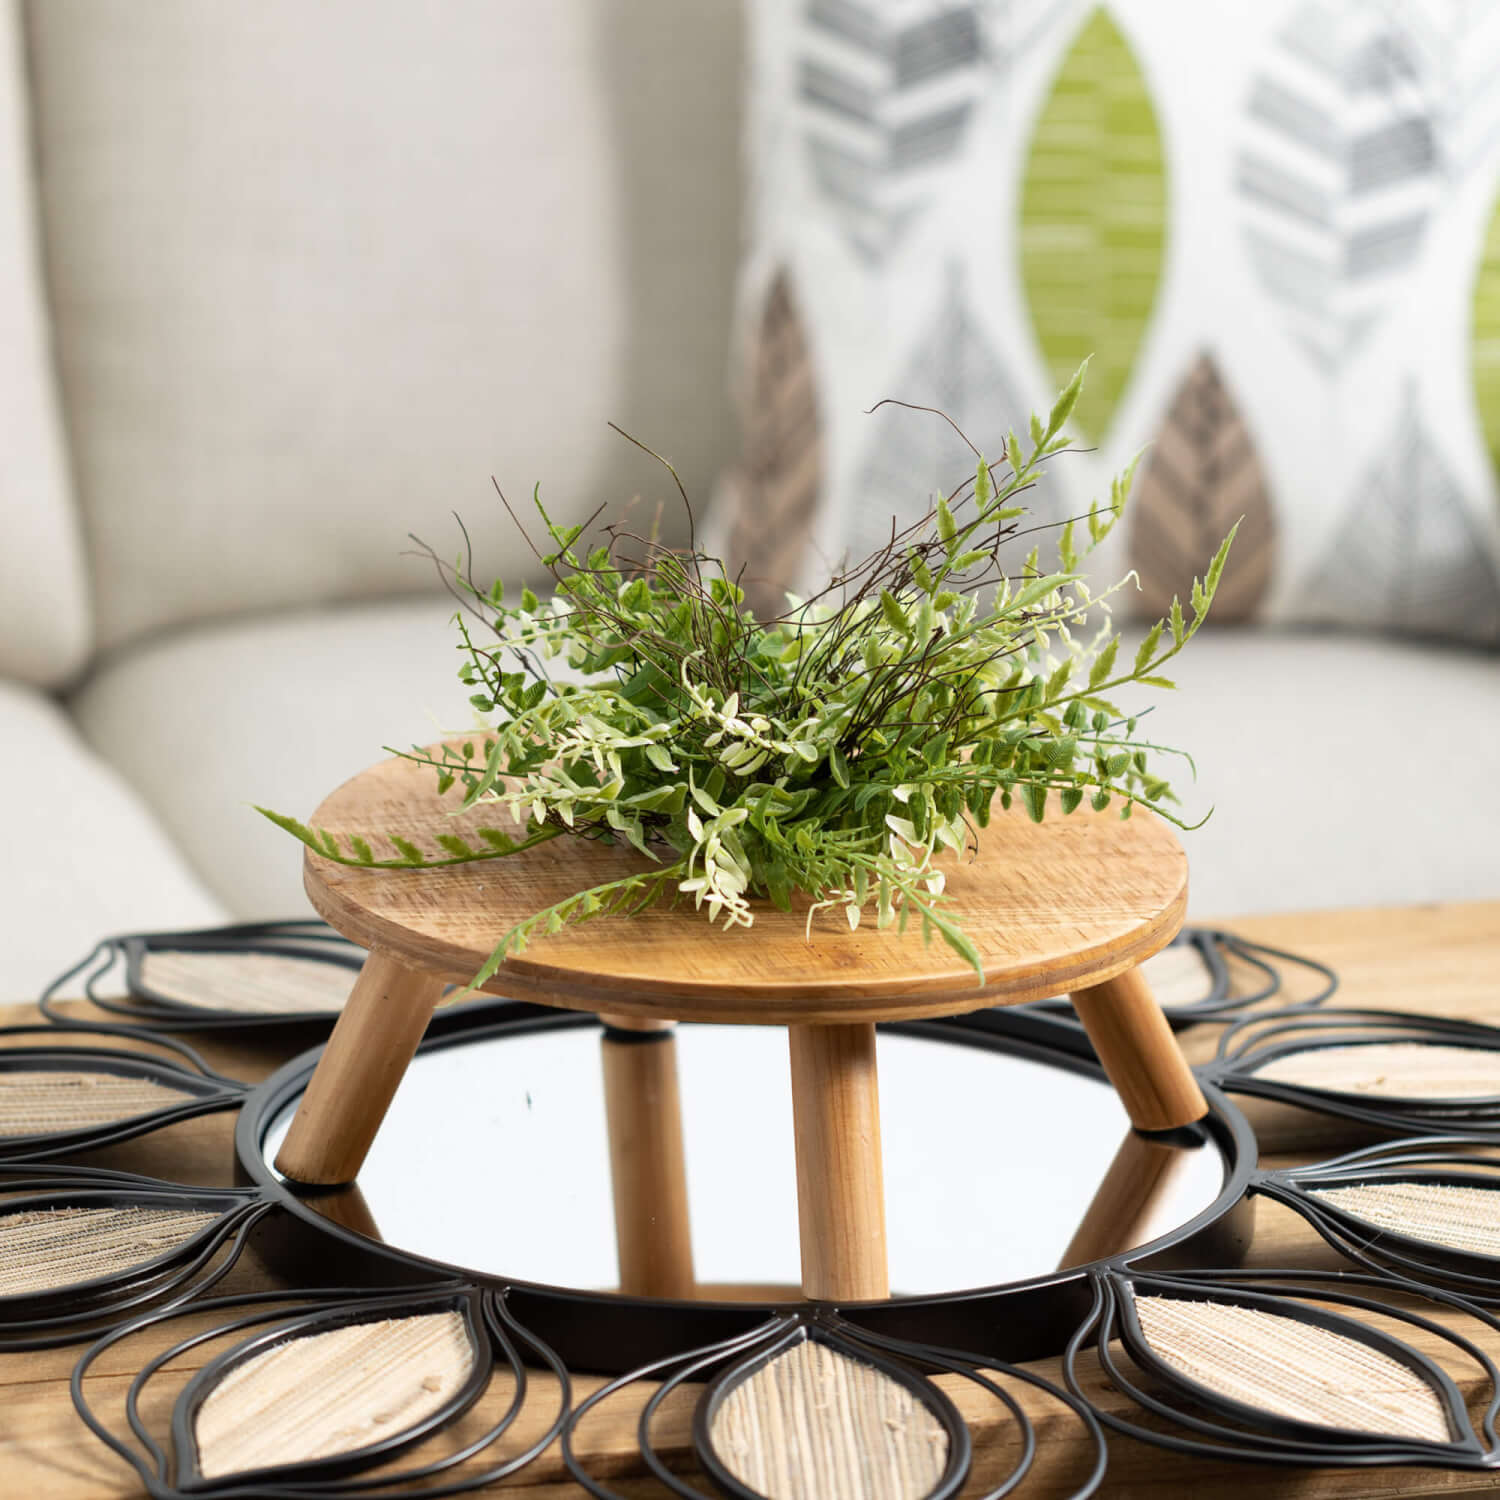 Graduating Sized Wooden Risers Elevate Home Decor - Trays